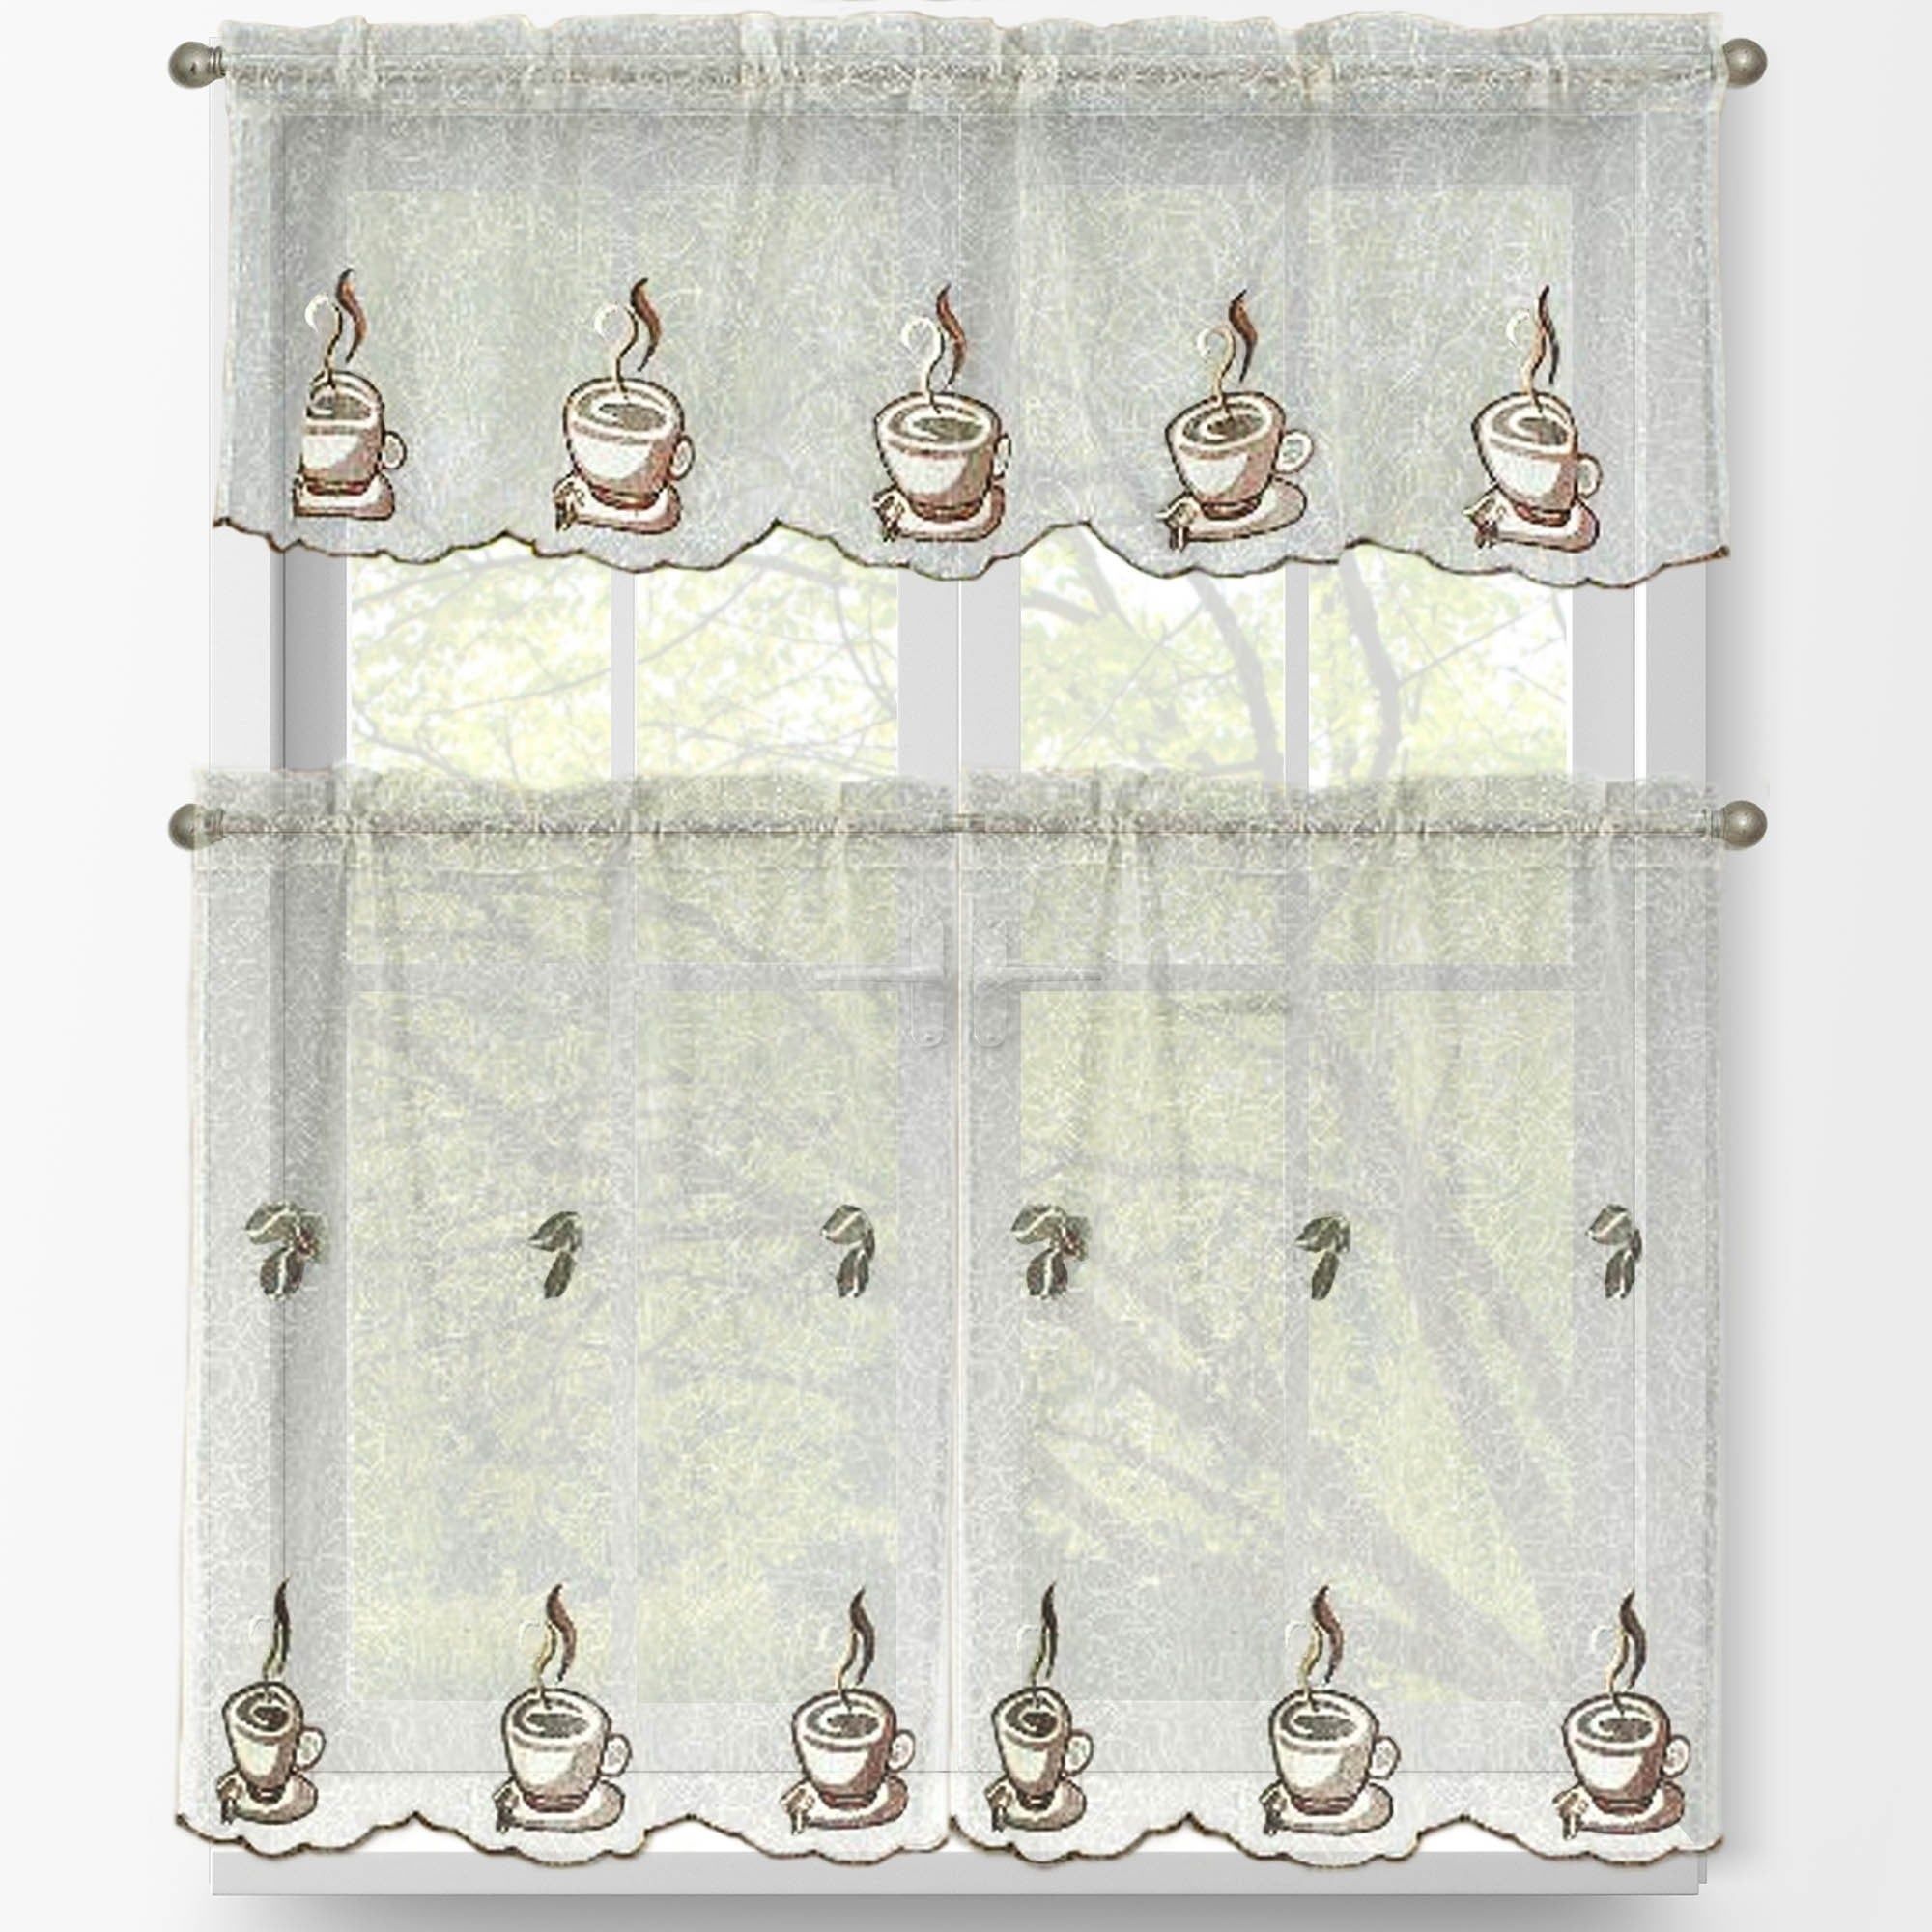 Window Elements Embroidered 3 Piece Kitchen Tier And Valance Set Regarding Coffee Drinks Embroidered Window Valances And Tiers (Photo 4 of 20)